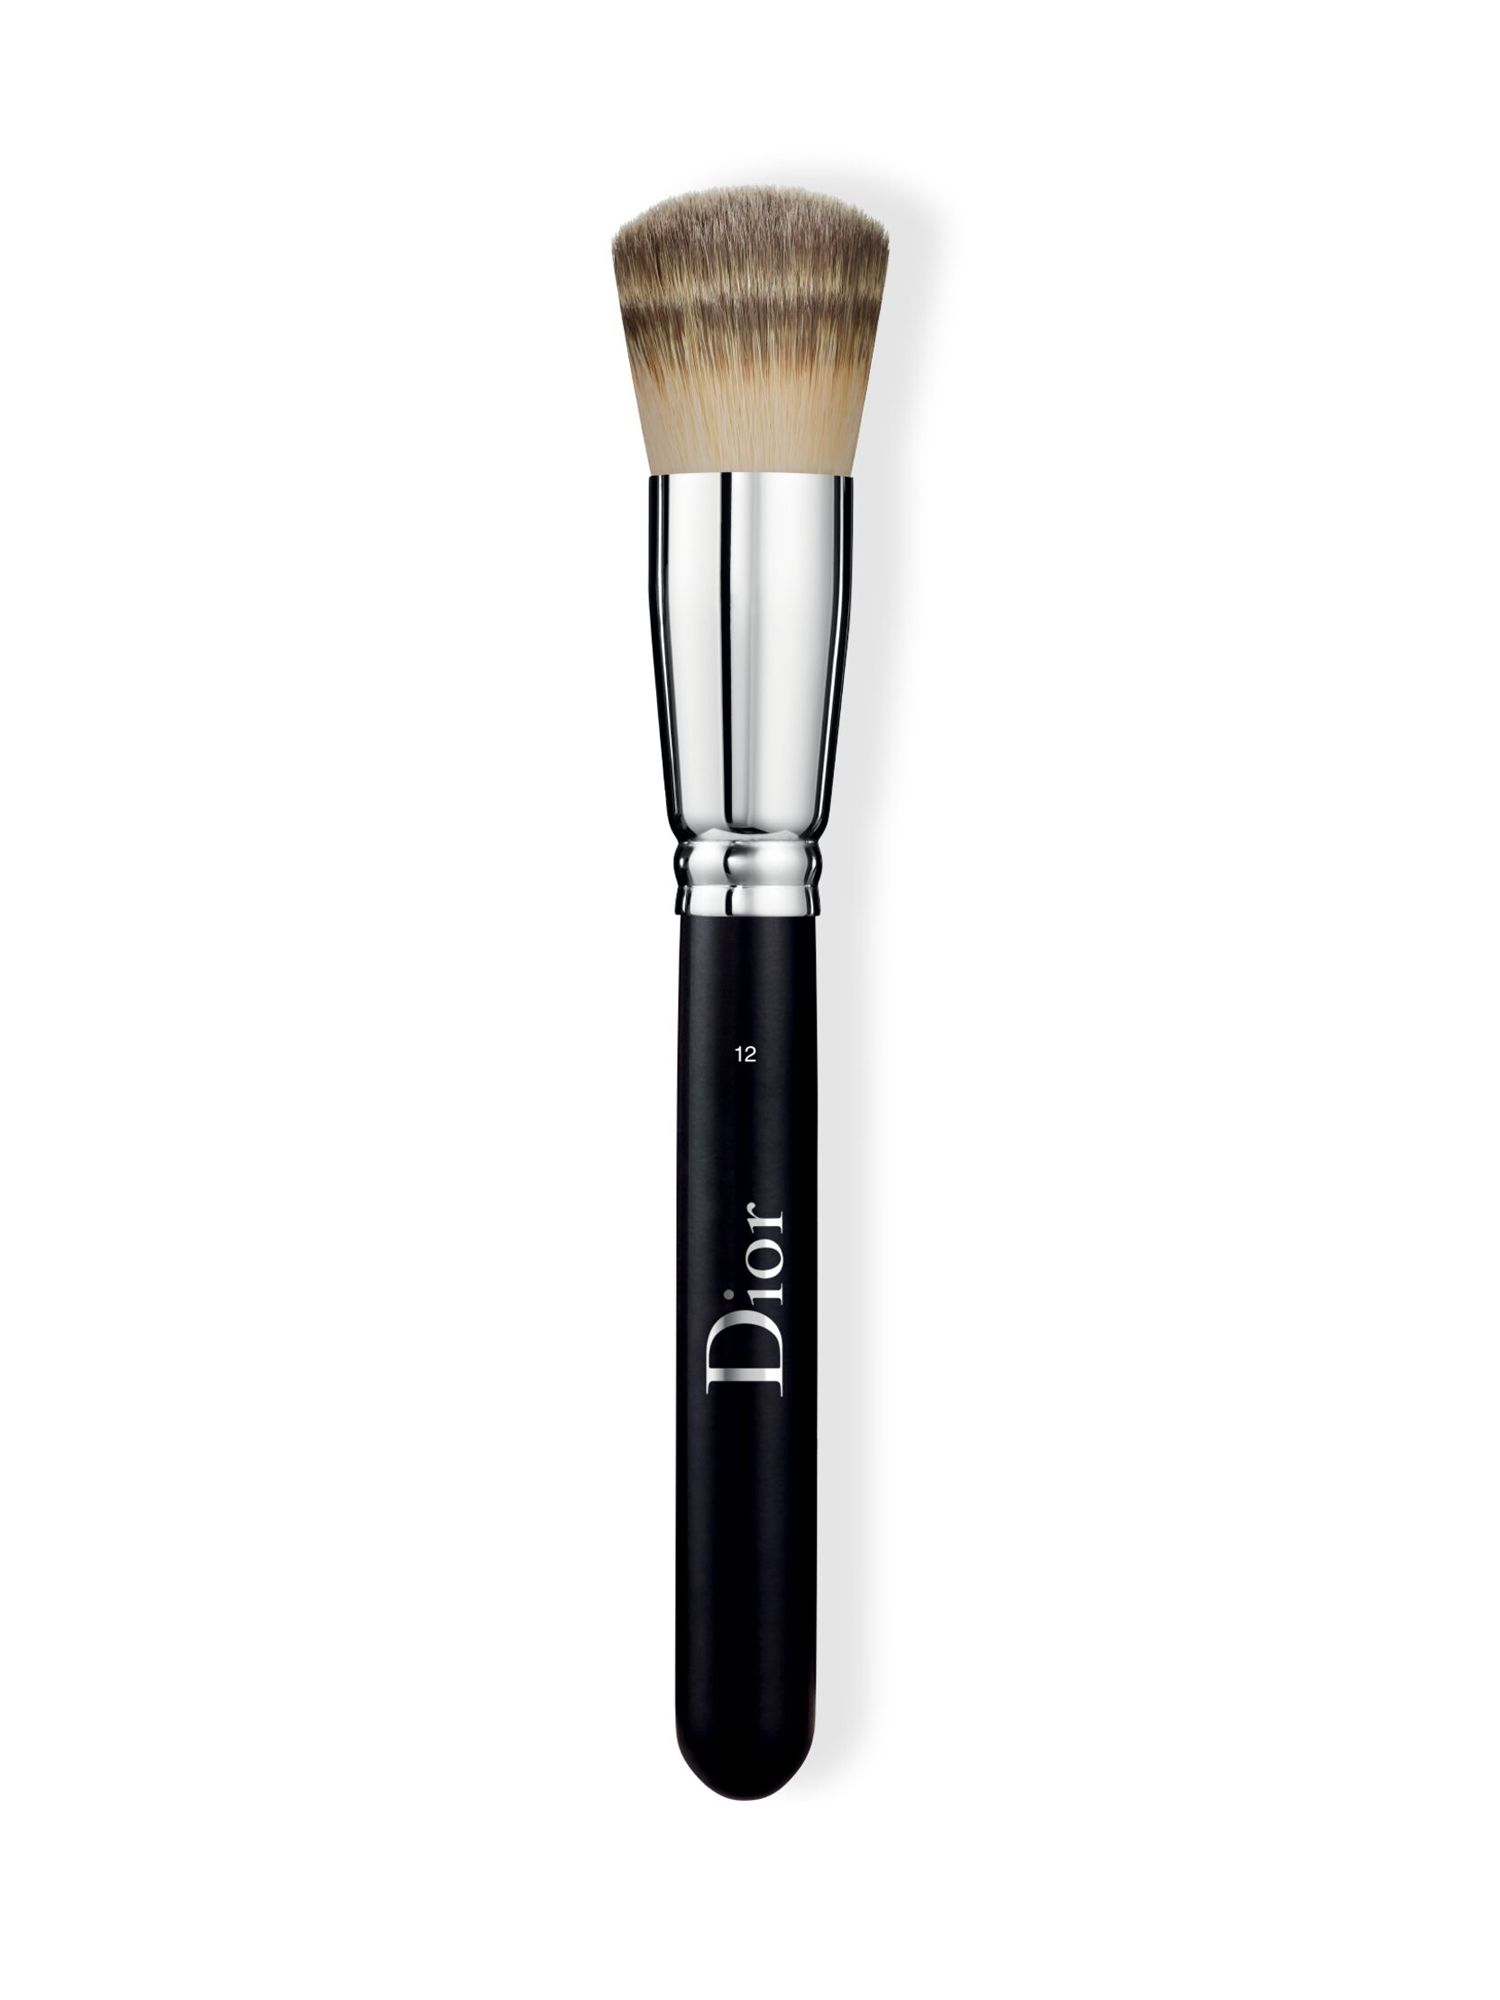 CHANEL 2-IN-1 Foundation Brush Fluid and Powder - Reviews